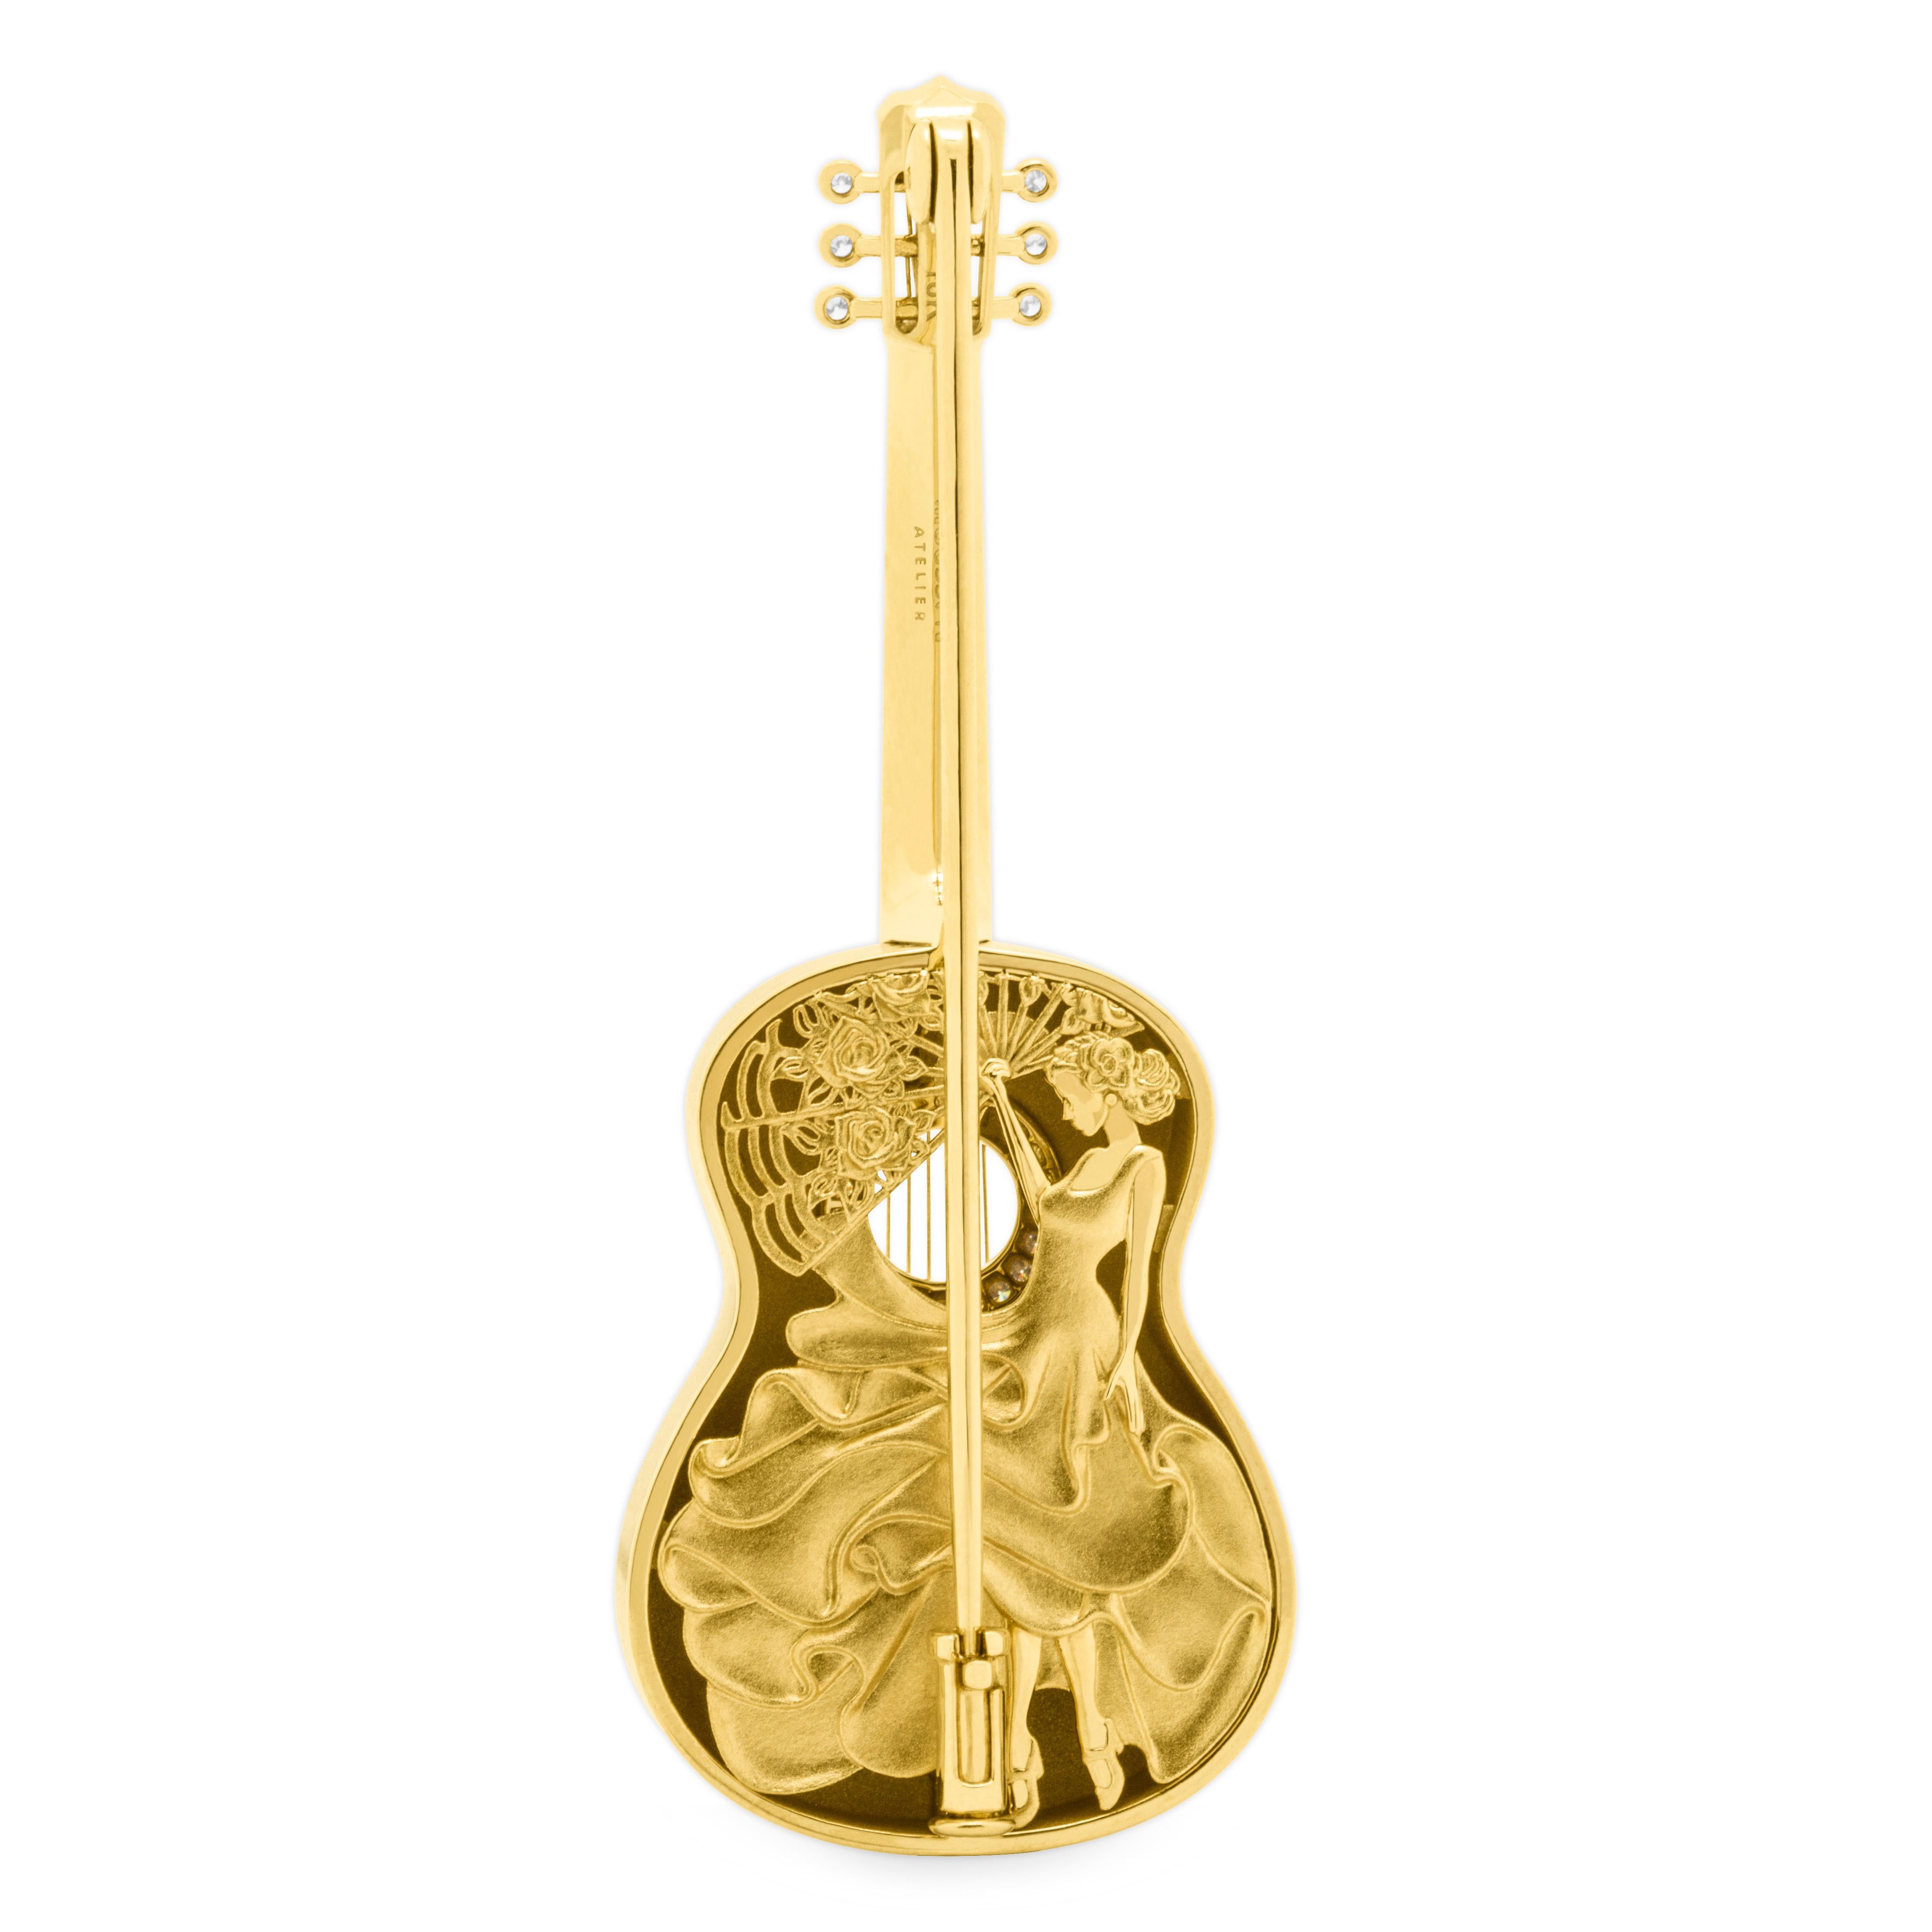 Diamonds Enamel 18 Karat Yellow Gold Guitar Brooch

New Brooch in our collection 